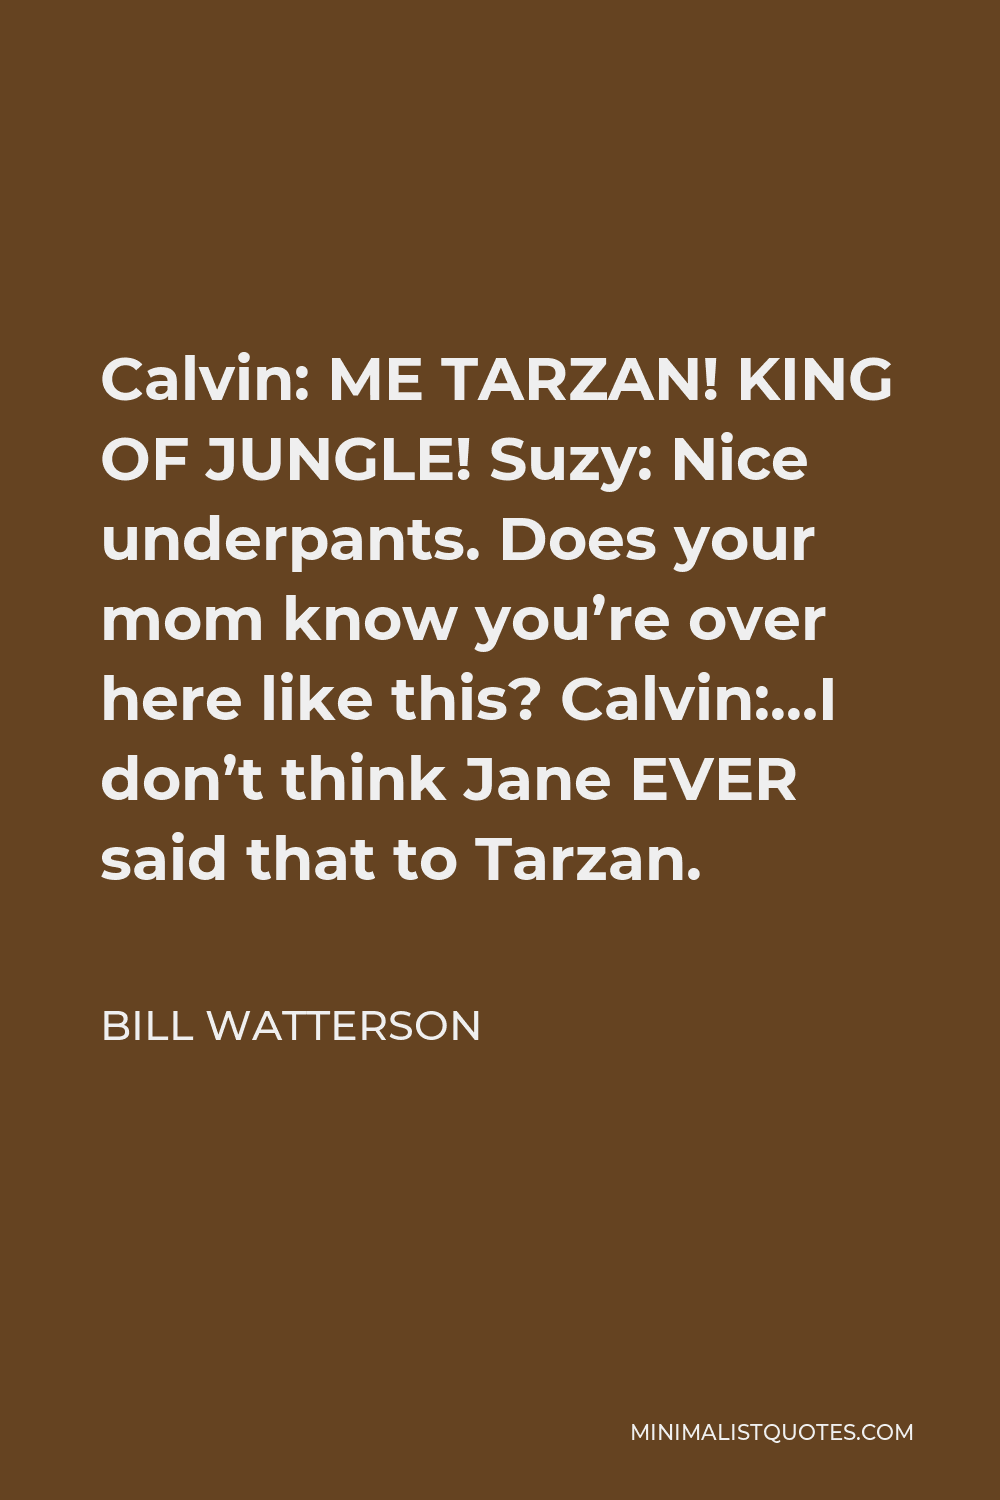 Bill Watterson Quote - Calvin: ME TARZAN! KING OF JUNGLE! Suzy: Nice underpants. Does your mom know you’re over here like this? Calvin:…I don’t think Jane EVER said that to Tarzan.